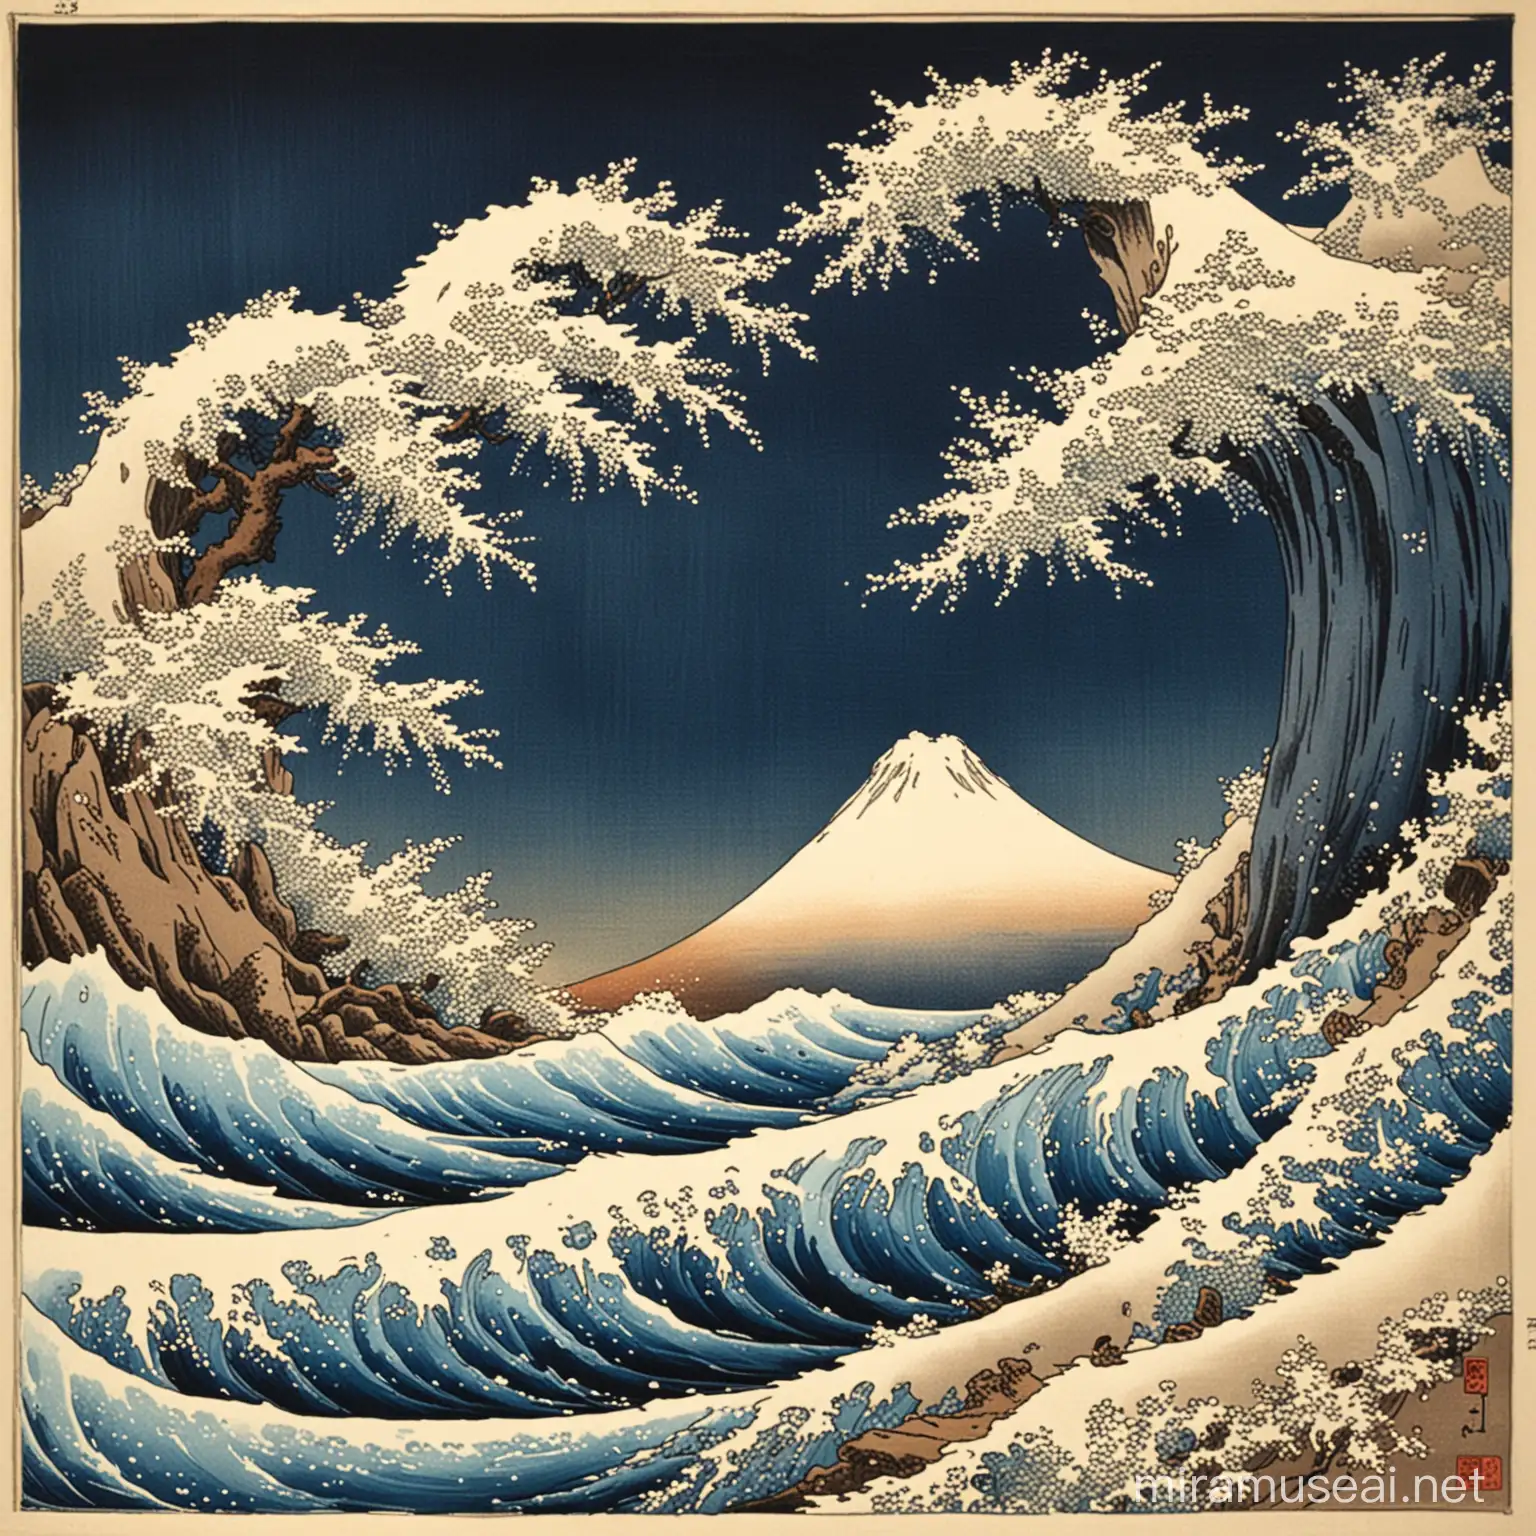 Creation painting if painted by Hokusai